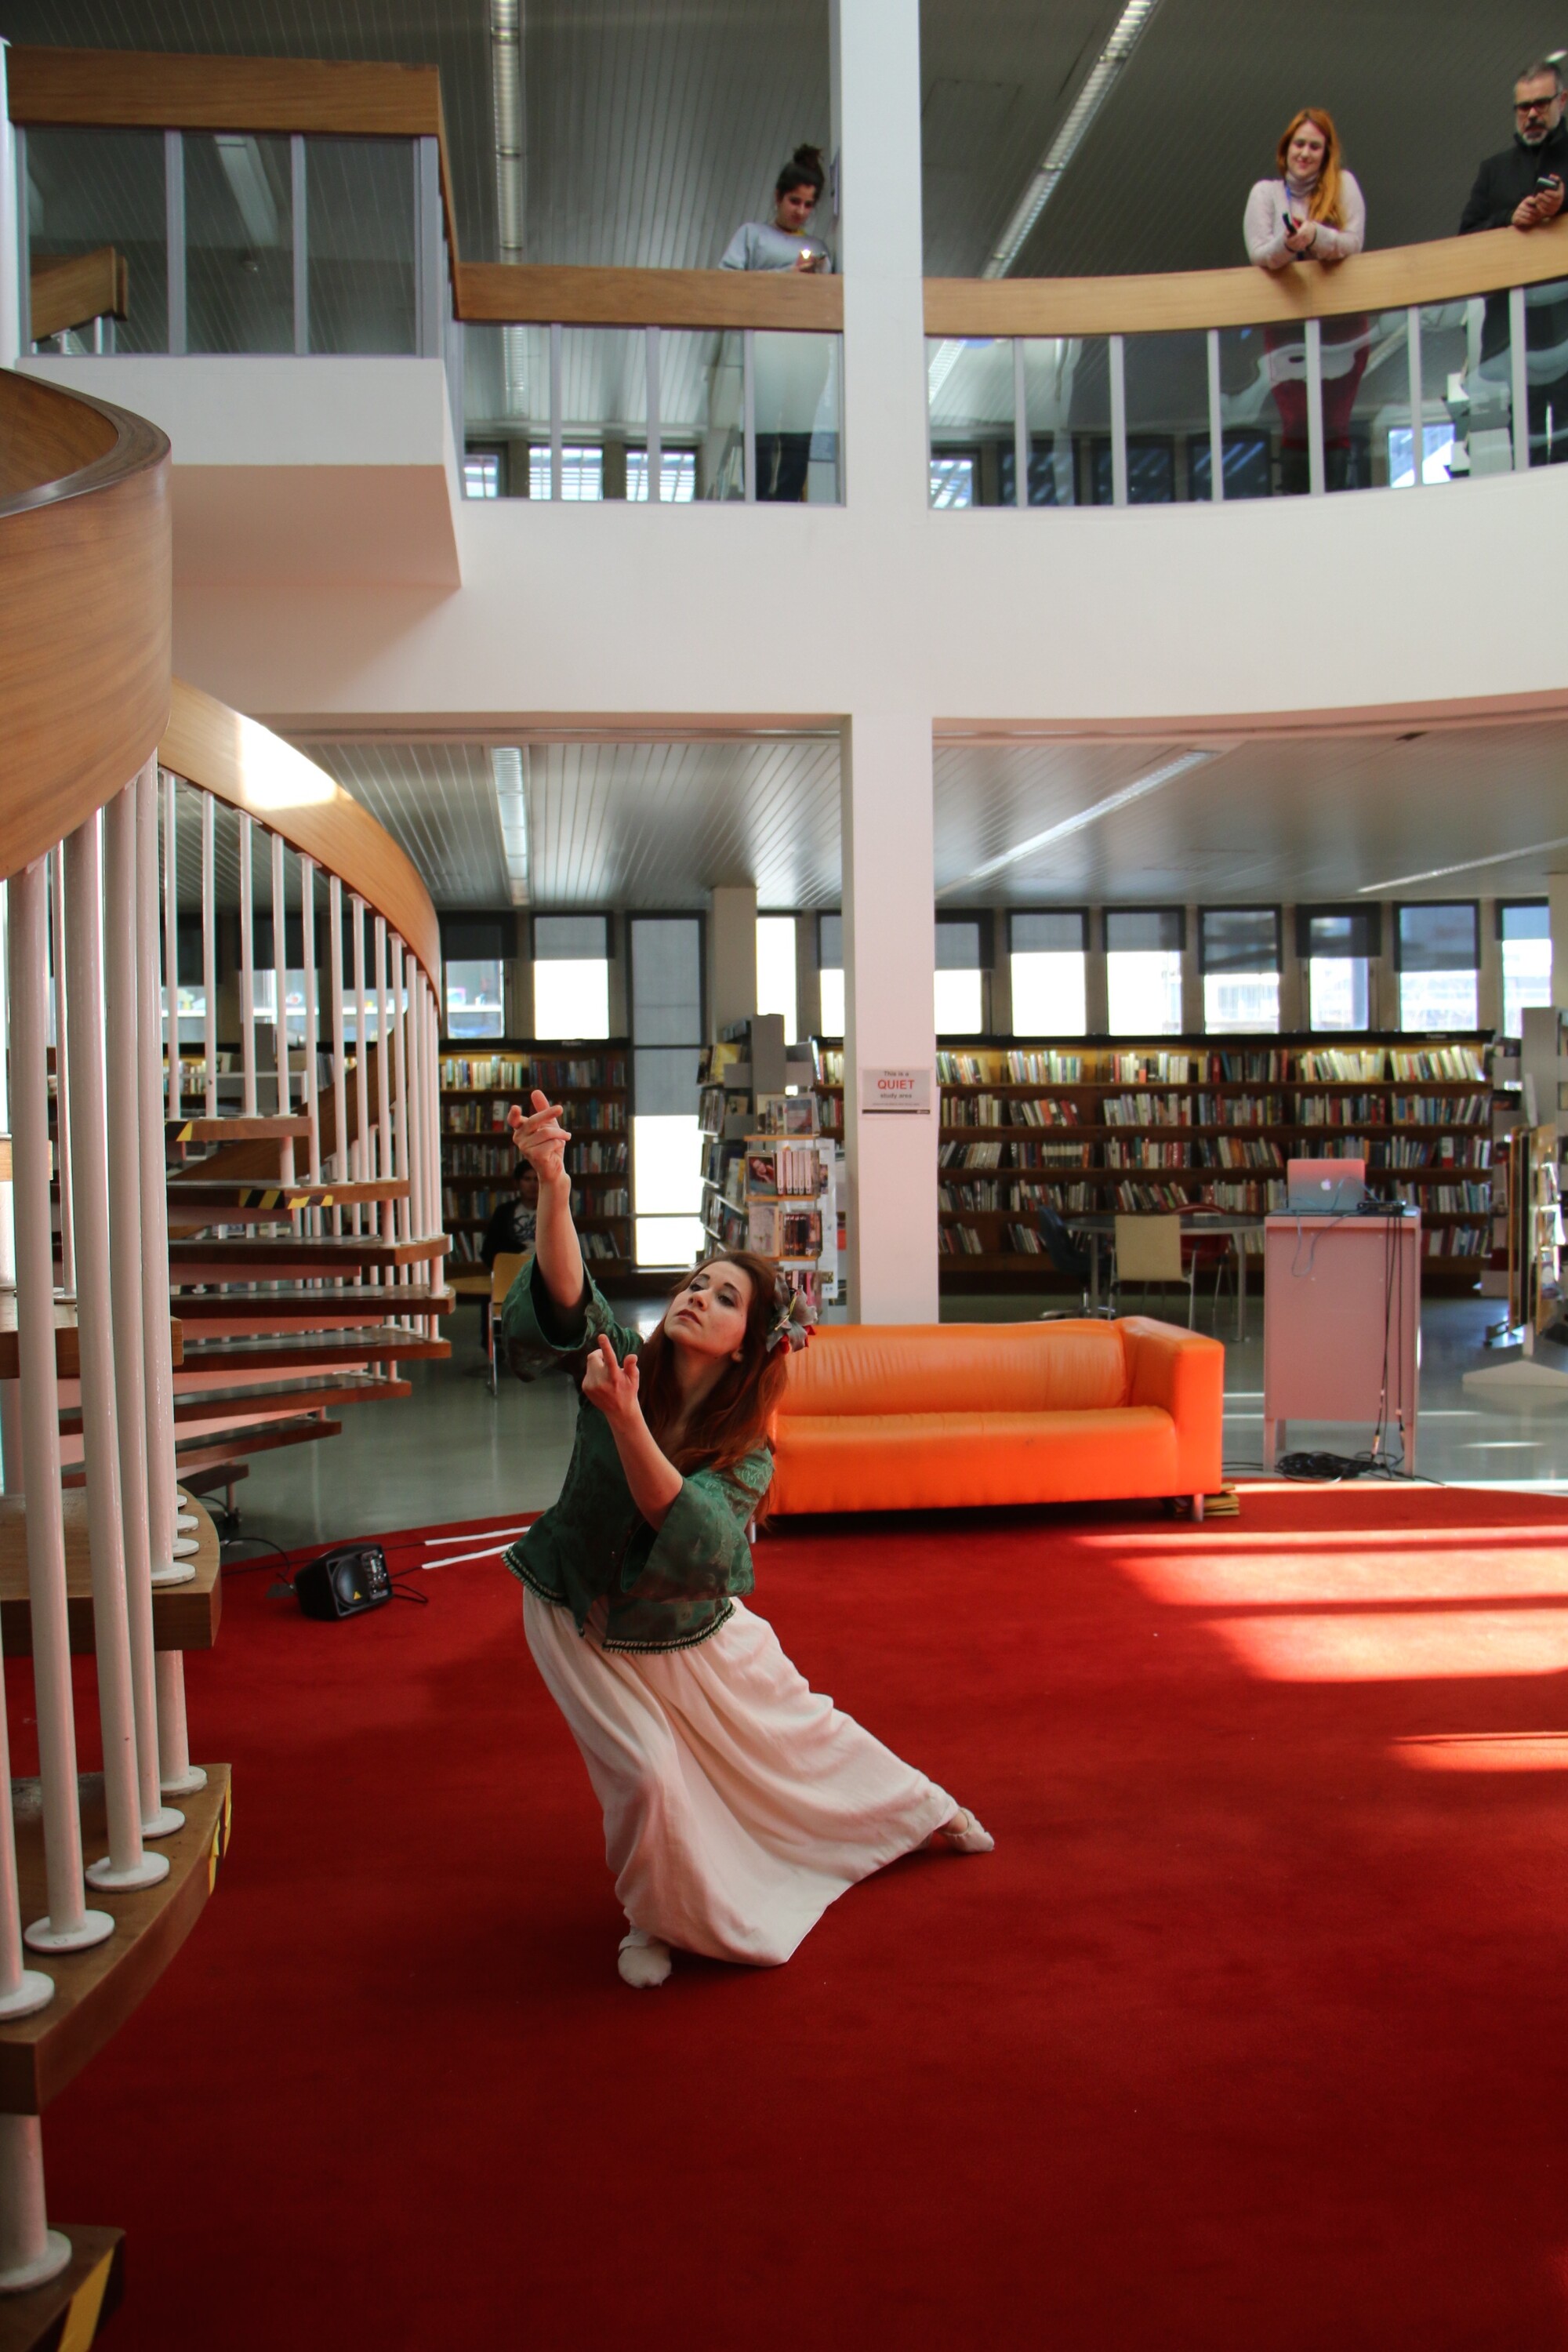 performer dances in a library while audience members watch